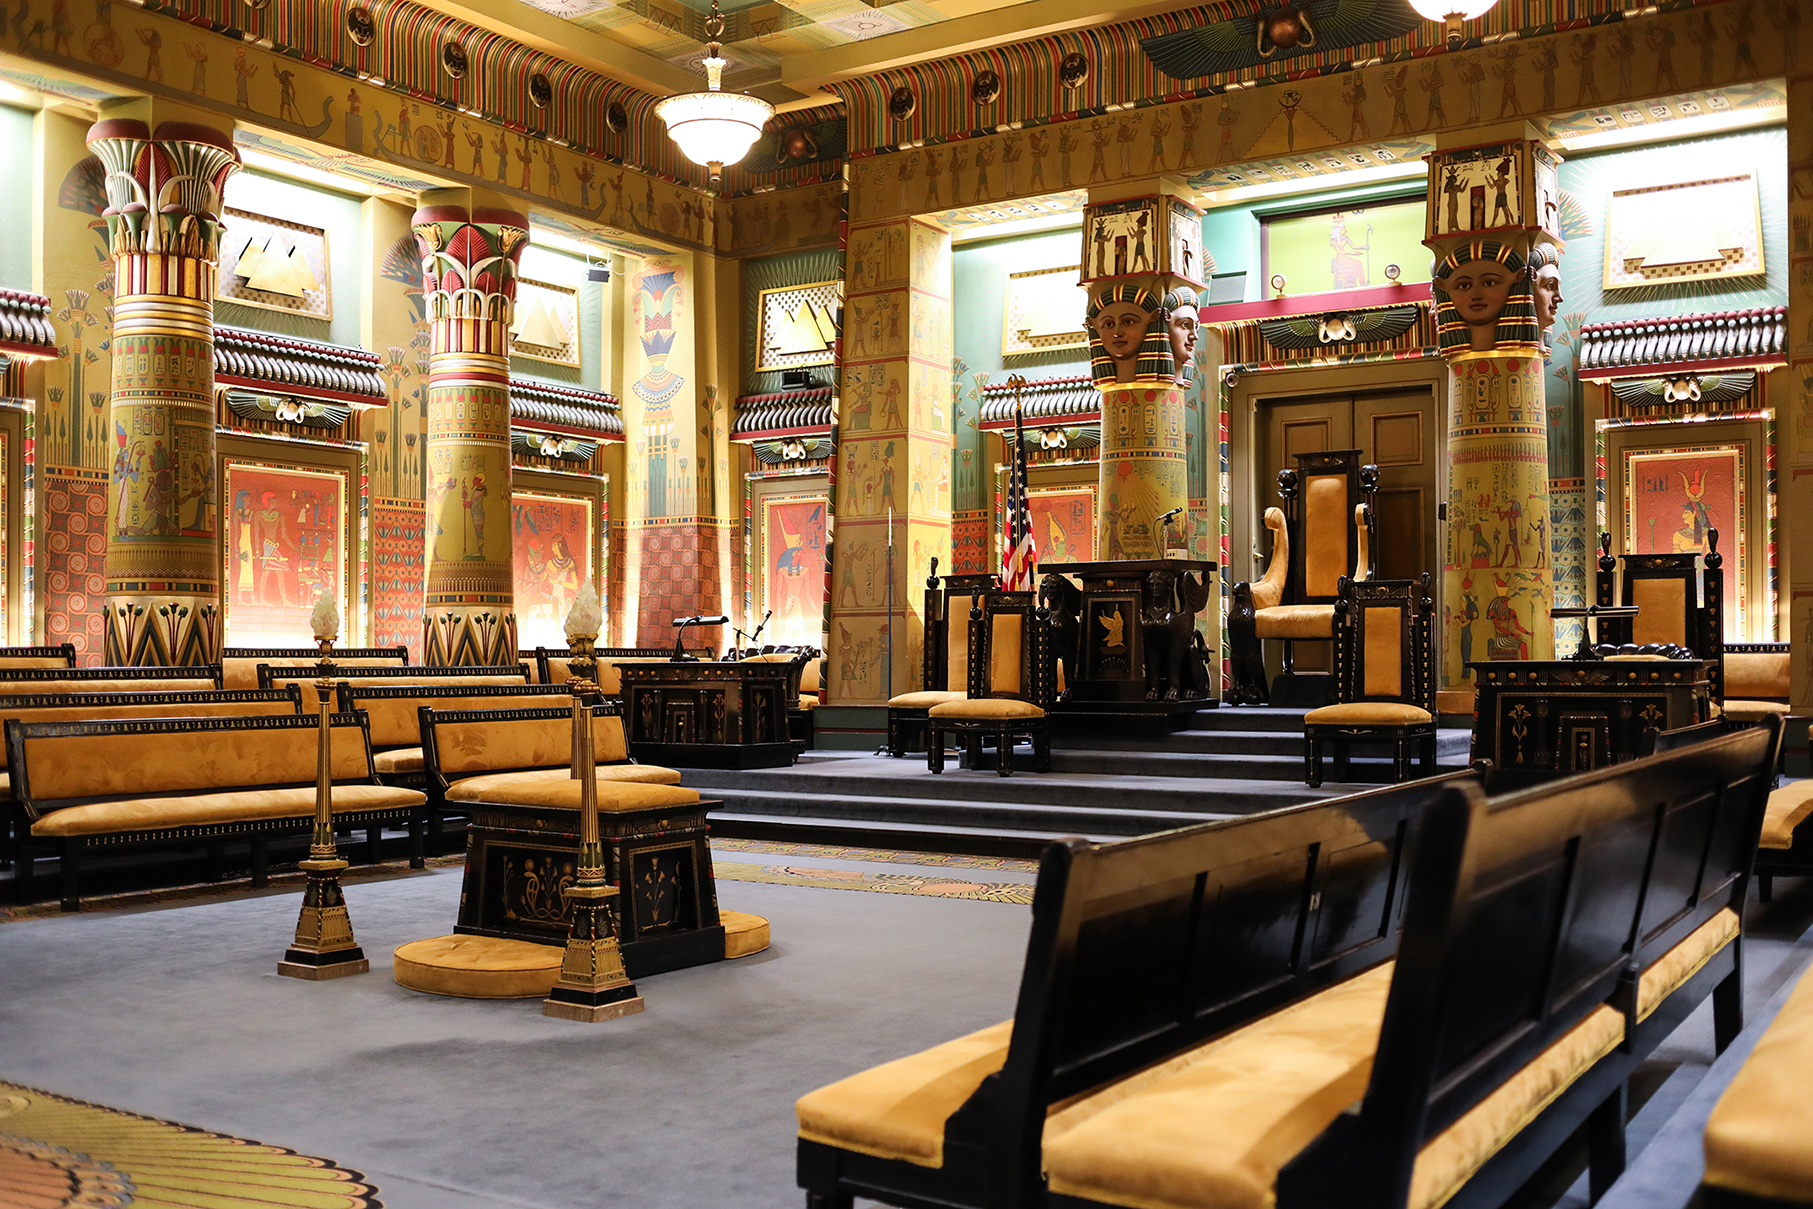 Photo of the Egyptian Hall in The Masonic Temple